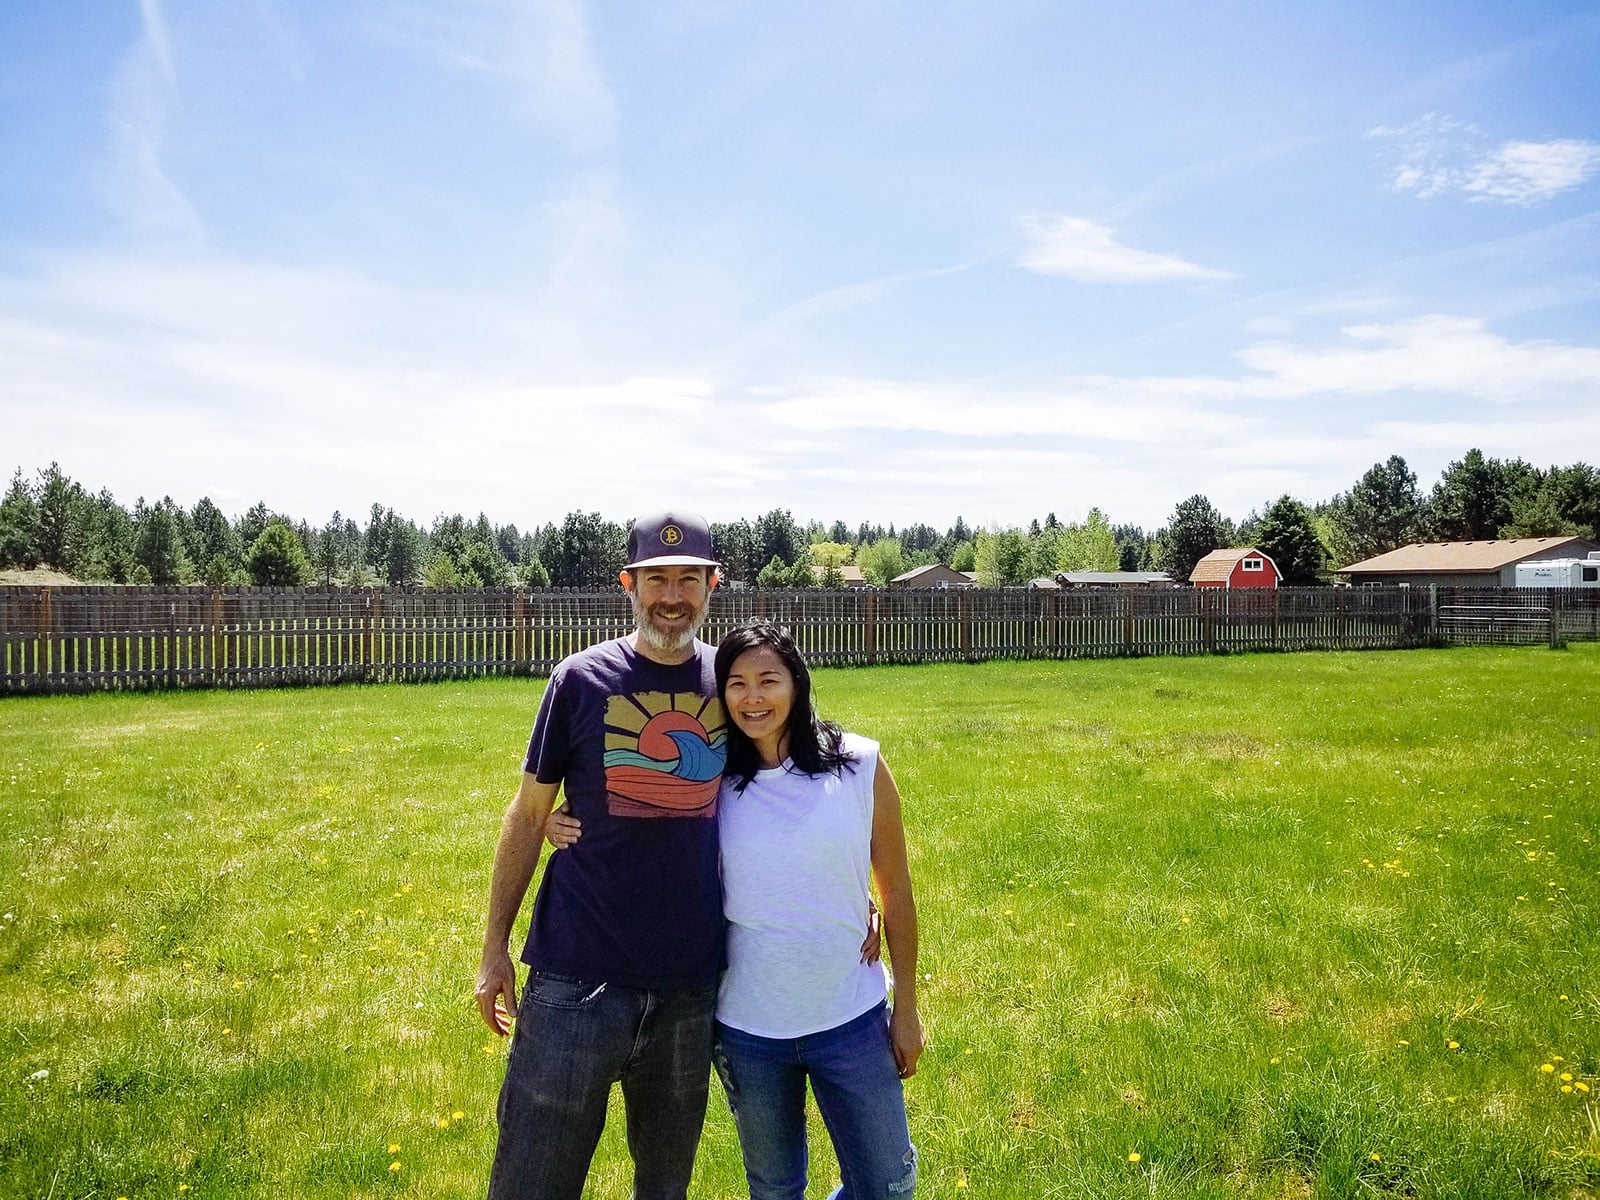 Smiling man and woman standing on an empty grassy parcel with a wooden fence in the background